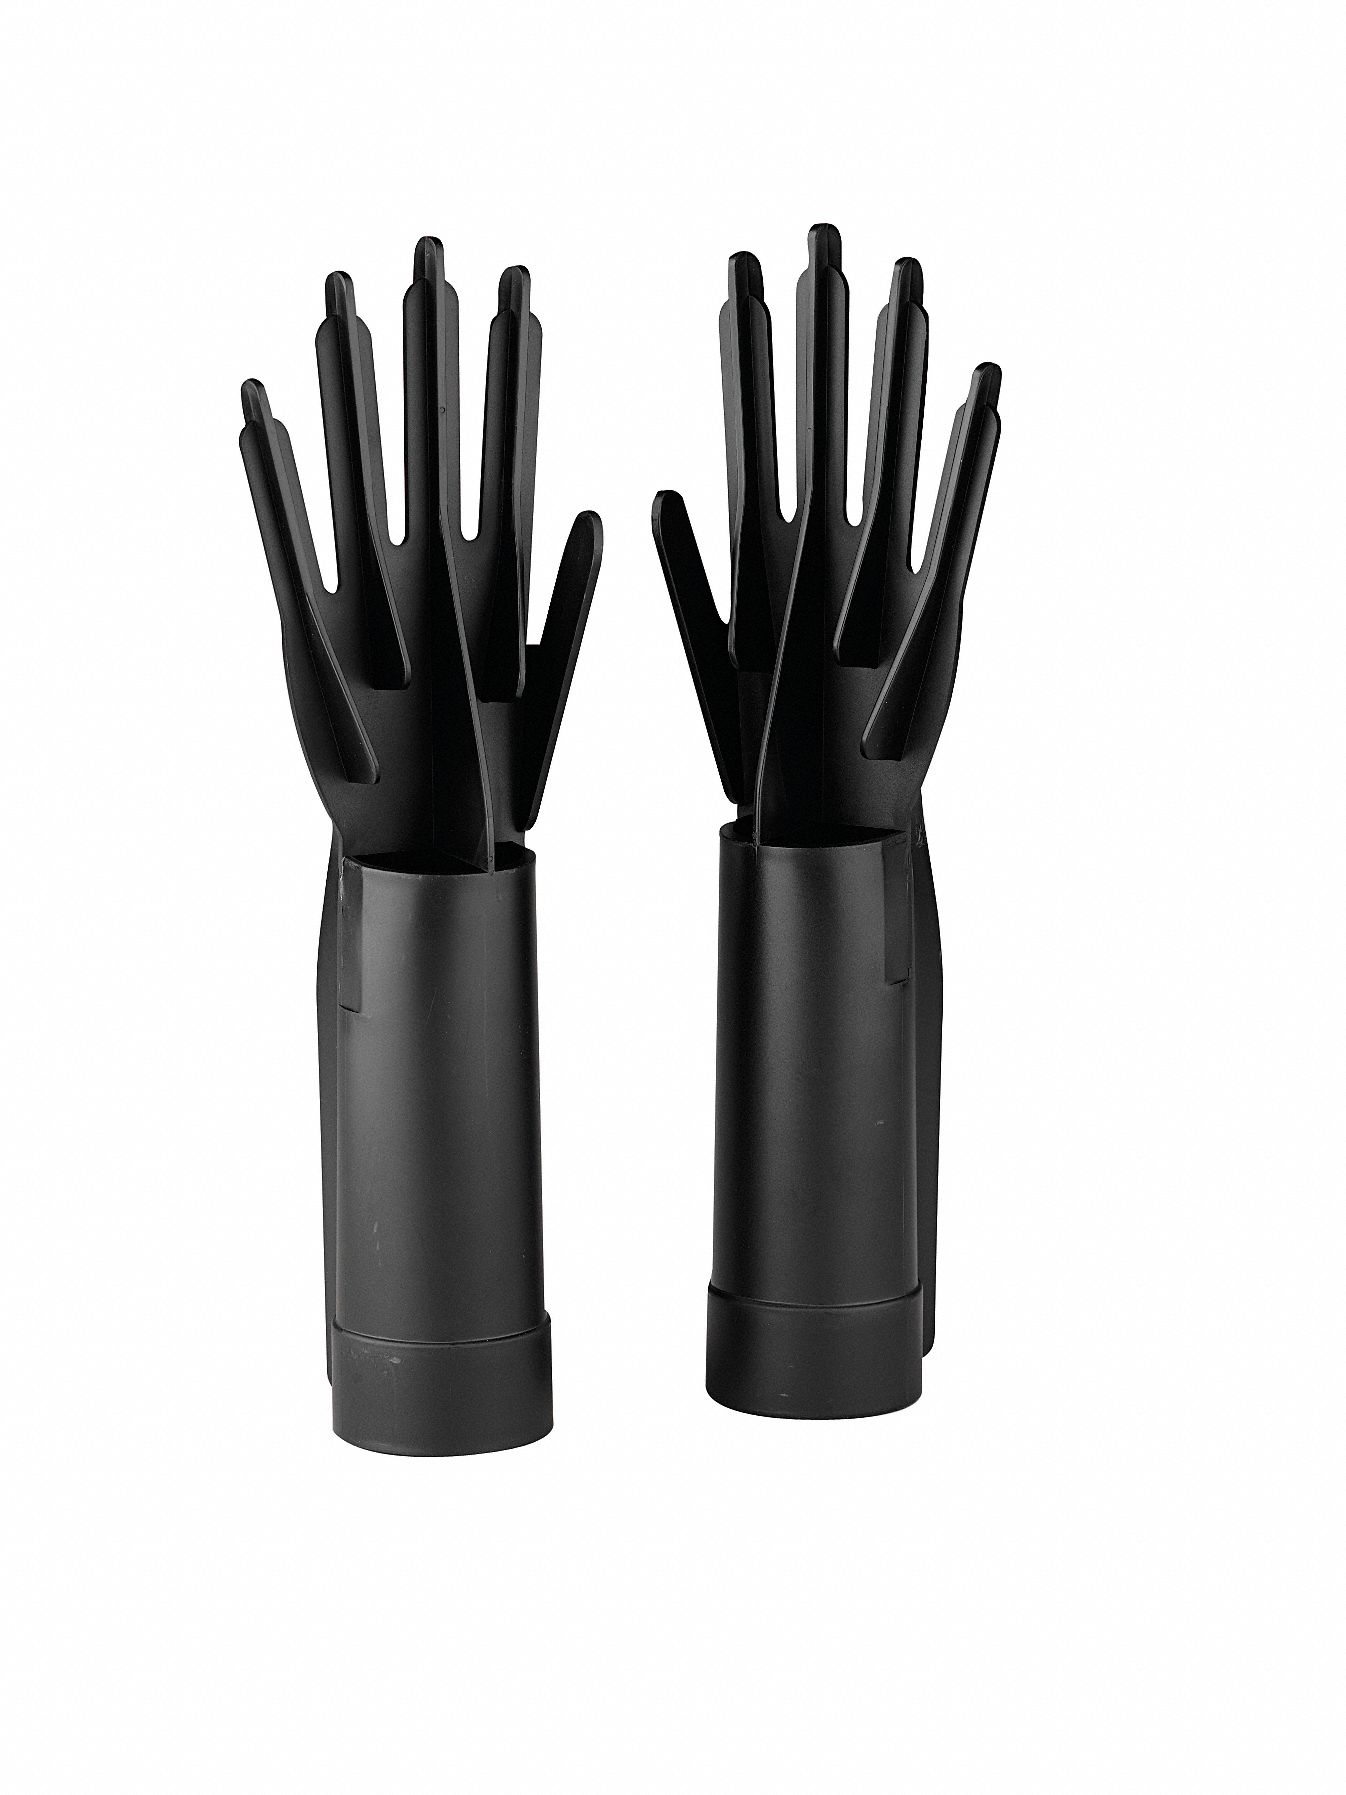 Glove Attachment,  14 in L x 5-3/4 in W x 3-1/2 in H,  For Use With Boot Dryer,  Black,  1 PR